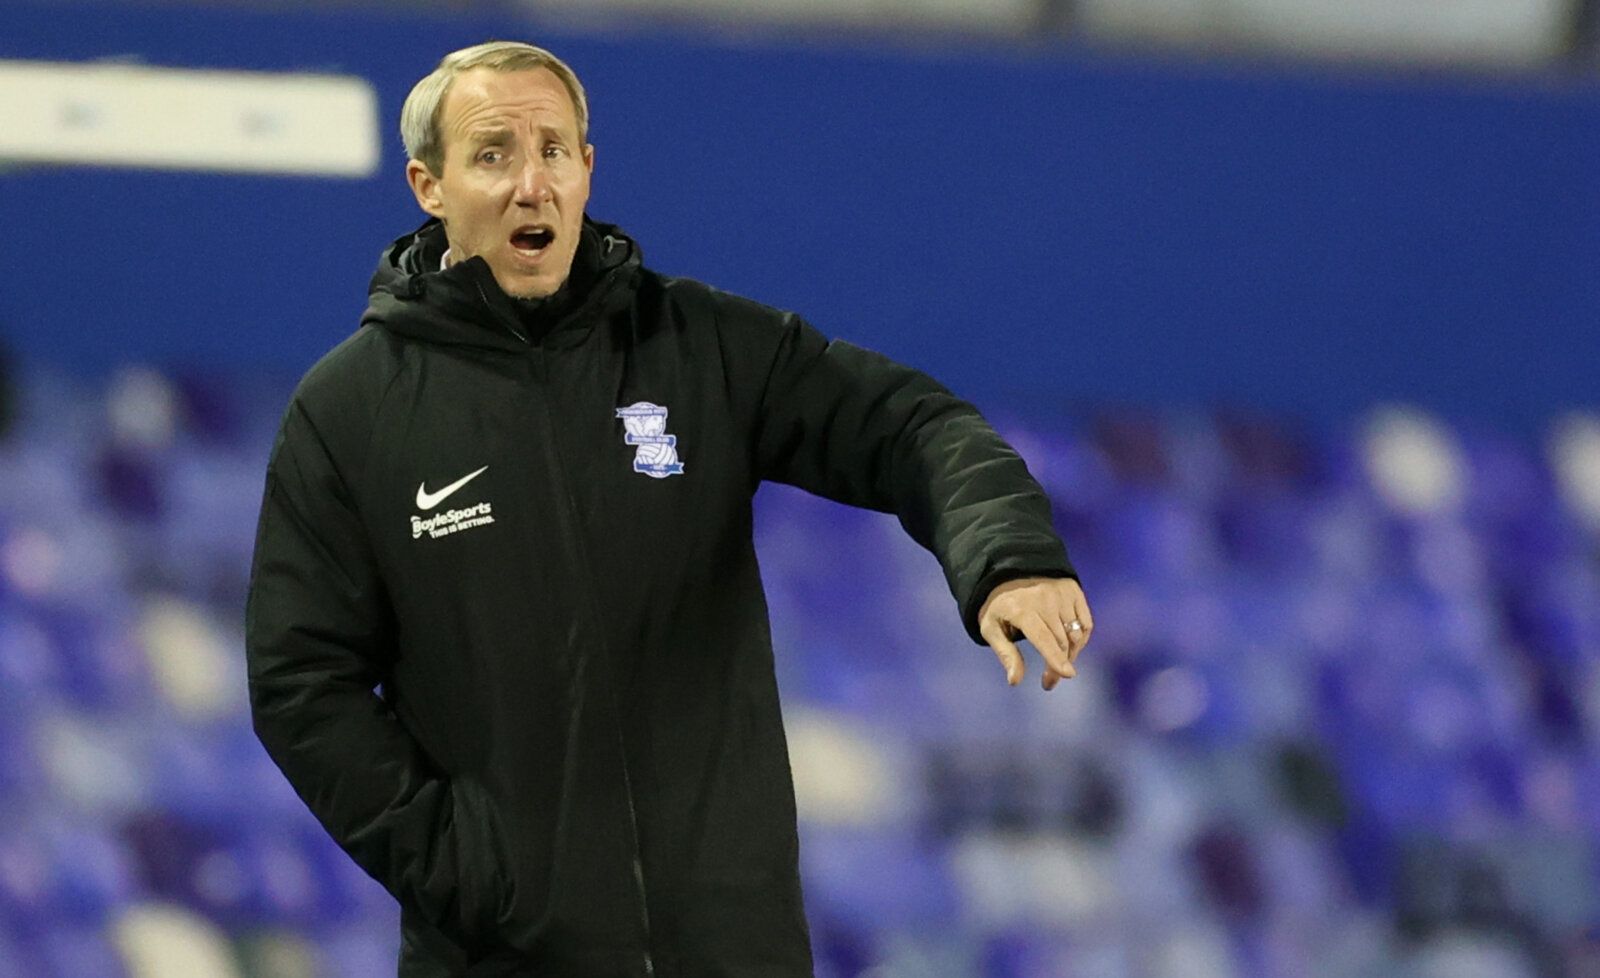 Soccer Football - Championship - Birmingham City v Reading - St Andrew's, Birmingham, Britain - March 17, 2021 Birmingham City manager Lee Bowyer reacts Action Images/Carl Recine EDITORIAL USE ONLY. No use with unauthorized audio, video, data, fixture lists, club/league logos or 'live' services. Online in-match use limited to 75 images, no video emulation. No use in betting, games or single club /league/player publications.  Please contact your account representative for further details.